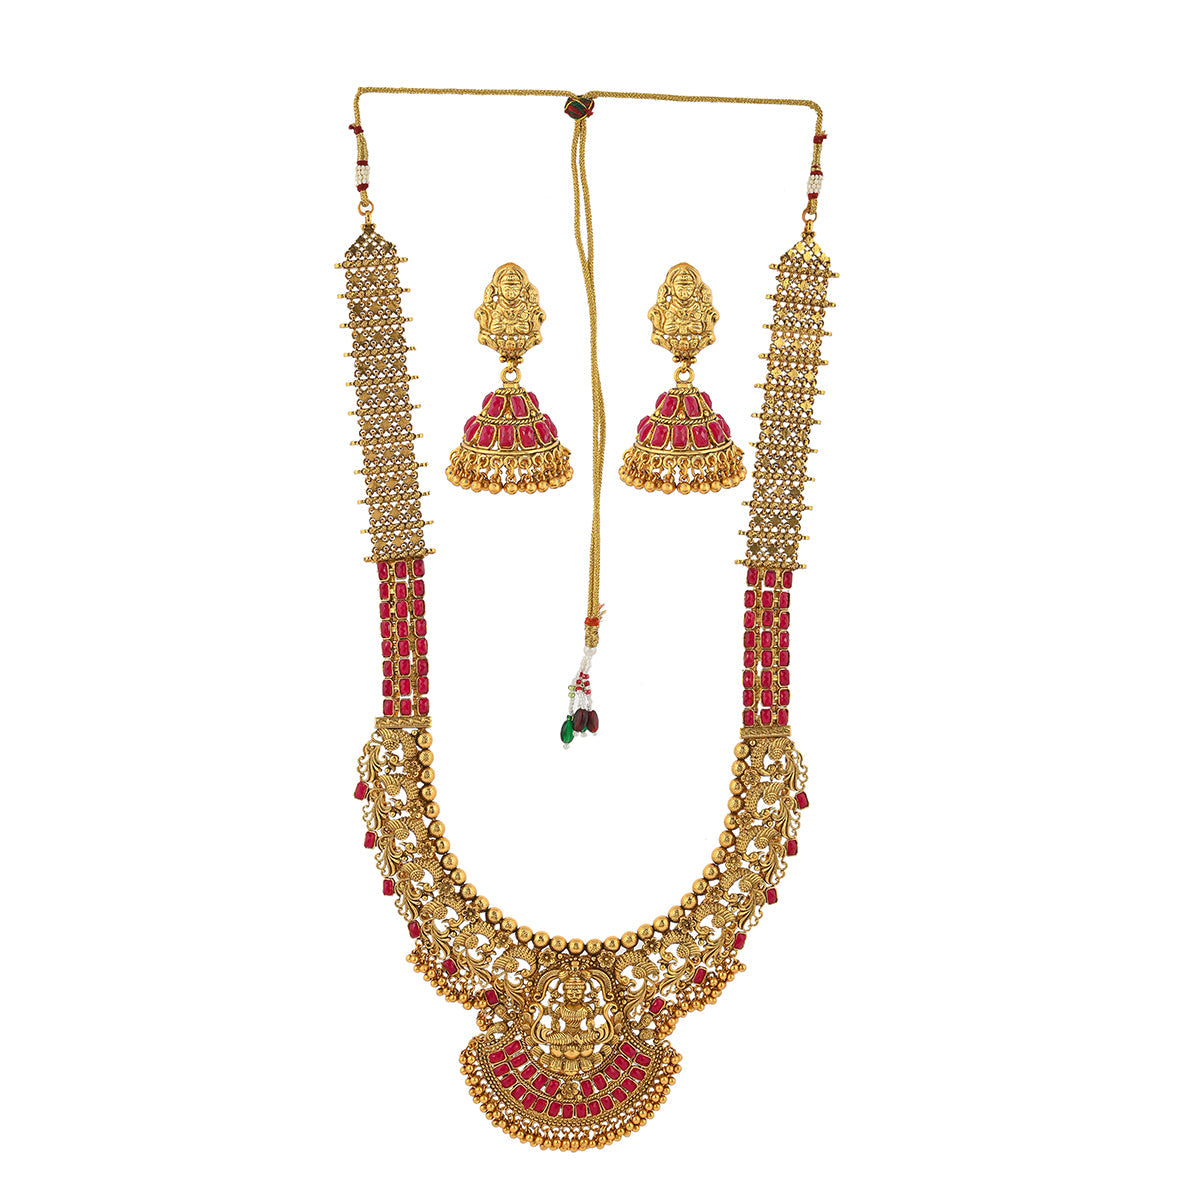 Women's Antique Inspired Gold Toned Cz Adorned Brass Temple Jewellery Set - Voylla